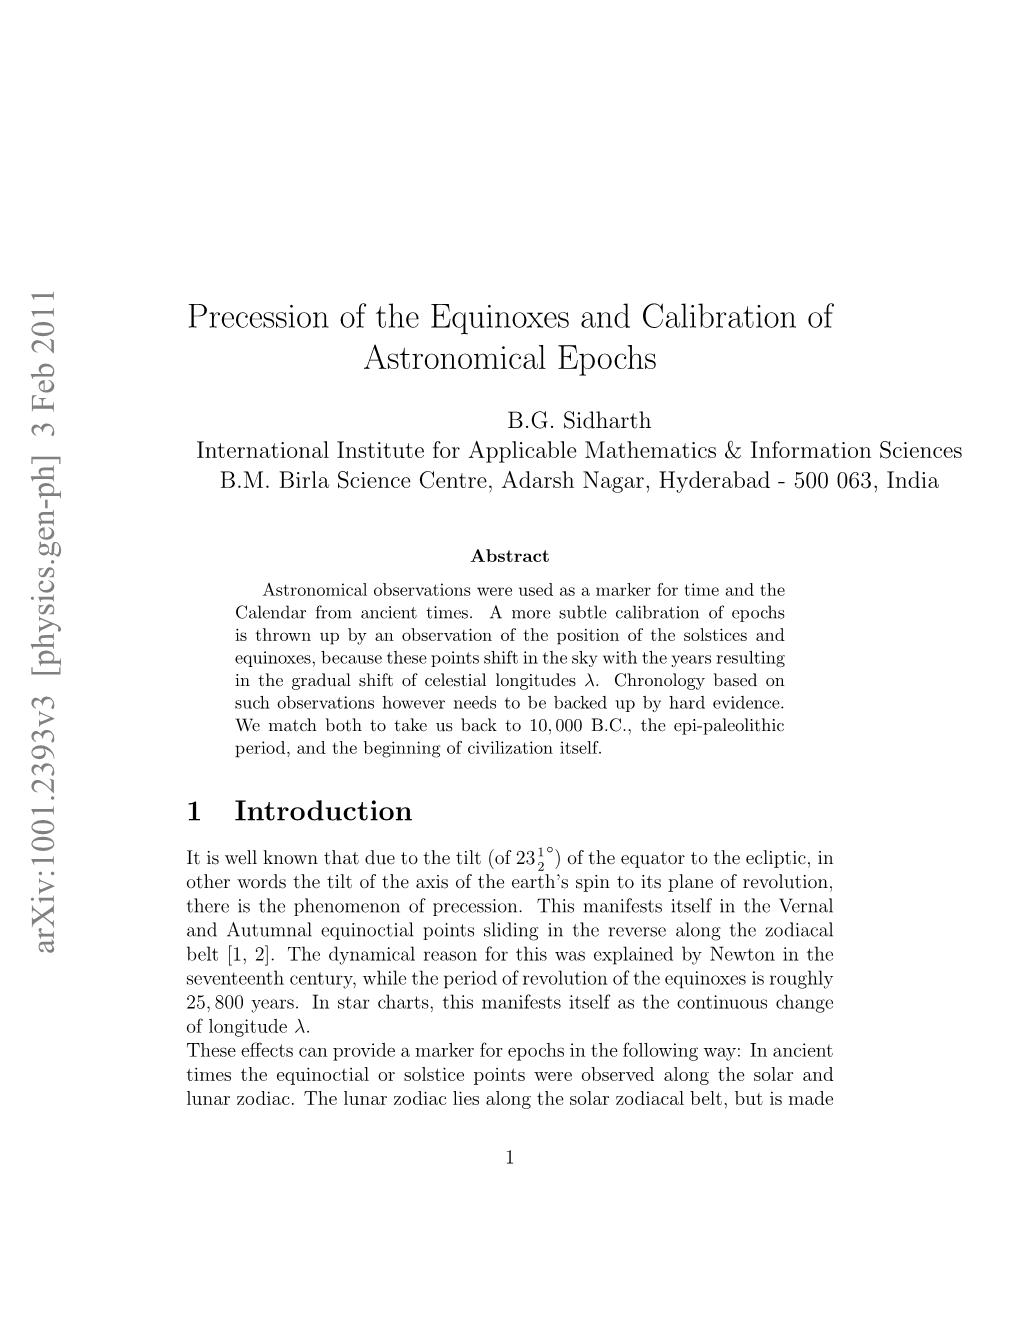 Precession of the Equinoxes and Calibration of Astronomical Epochs